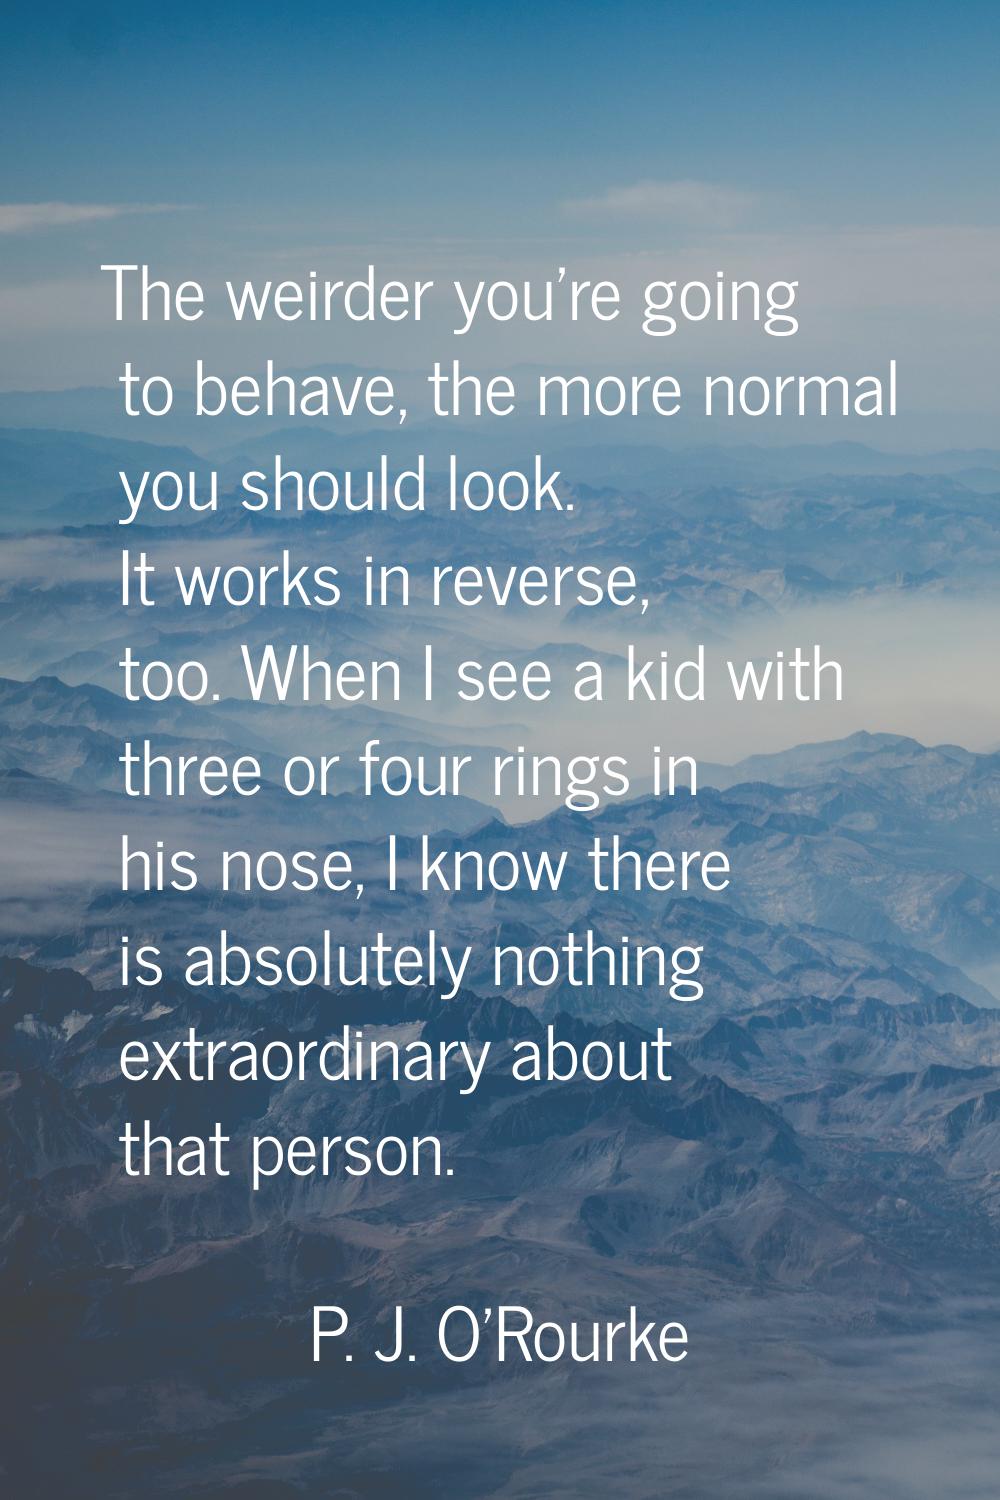 The weirder you're going to behave, the more normal you should look. It works in reverse, too. When